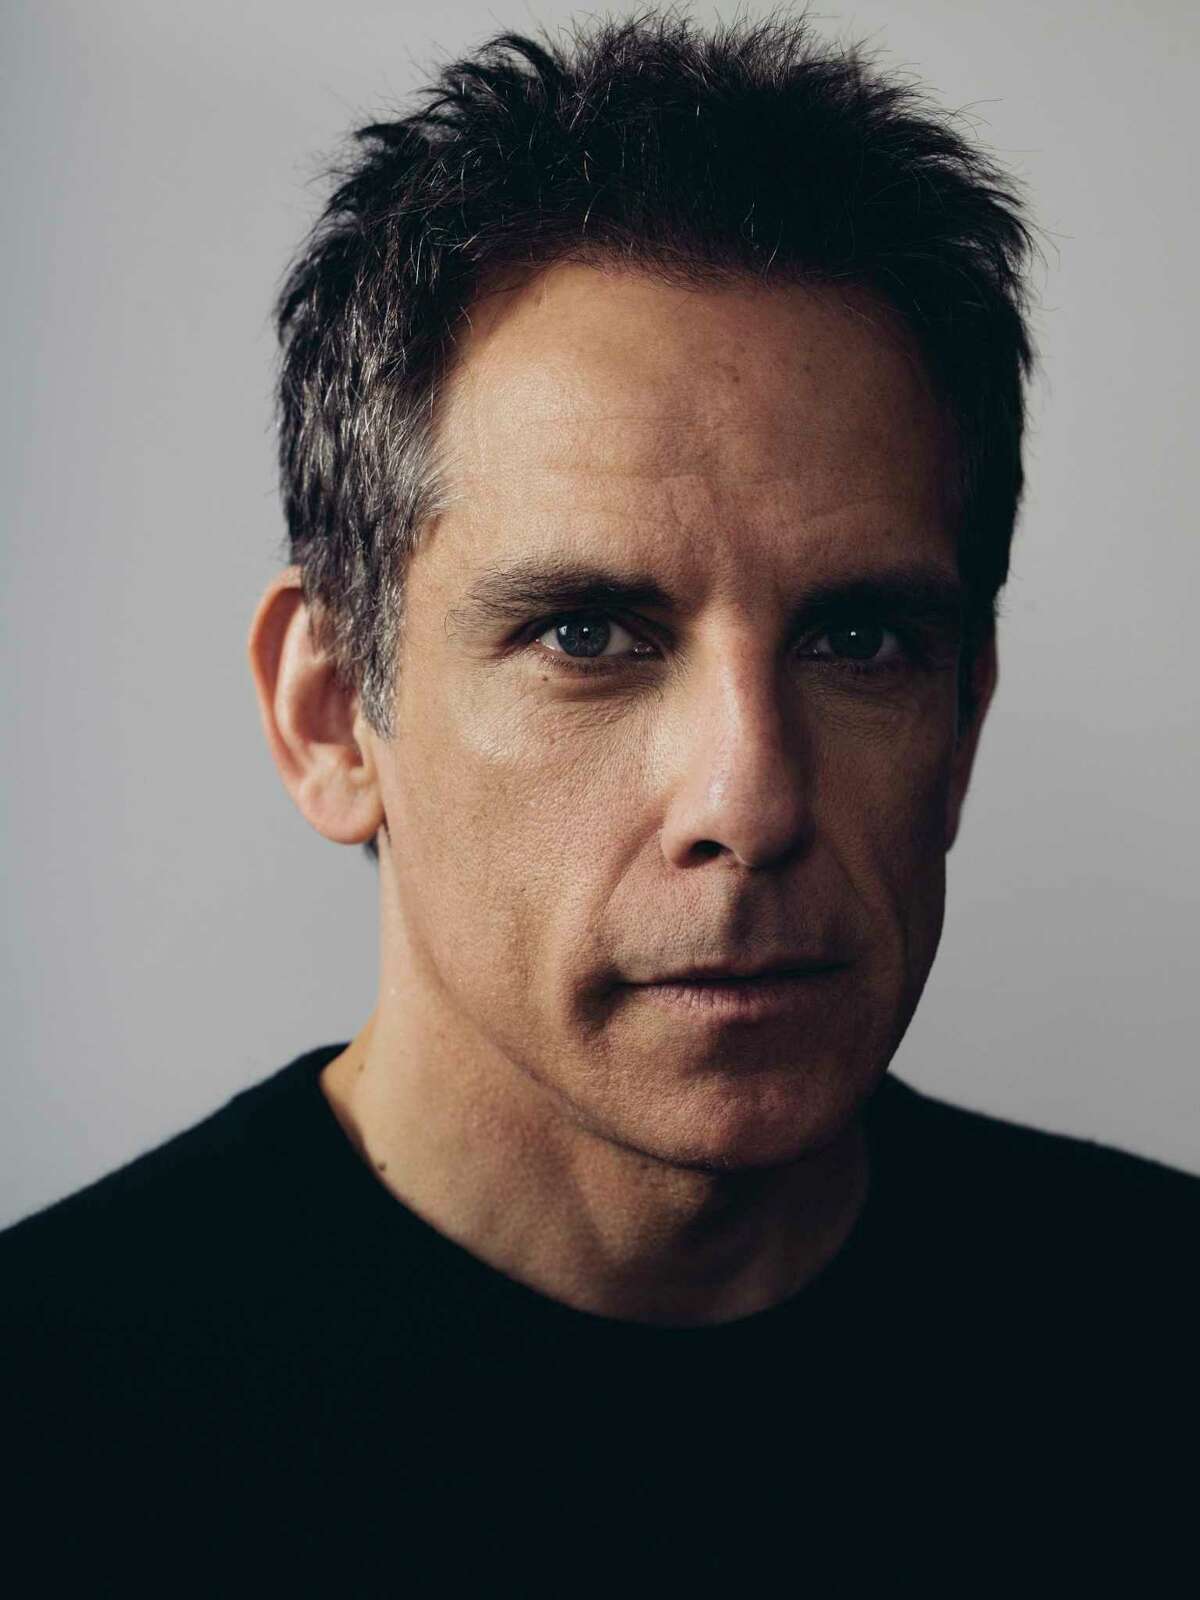 Ben Stiller was diagnosed with prostate cancer in 2014. (Geordie Wood/The New York Times)